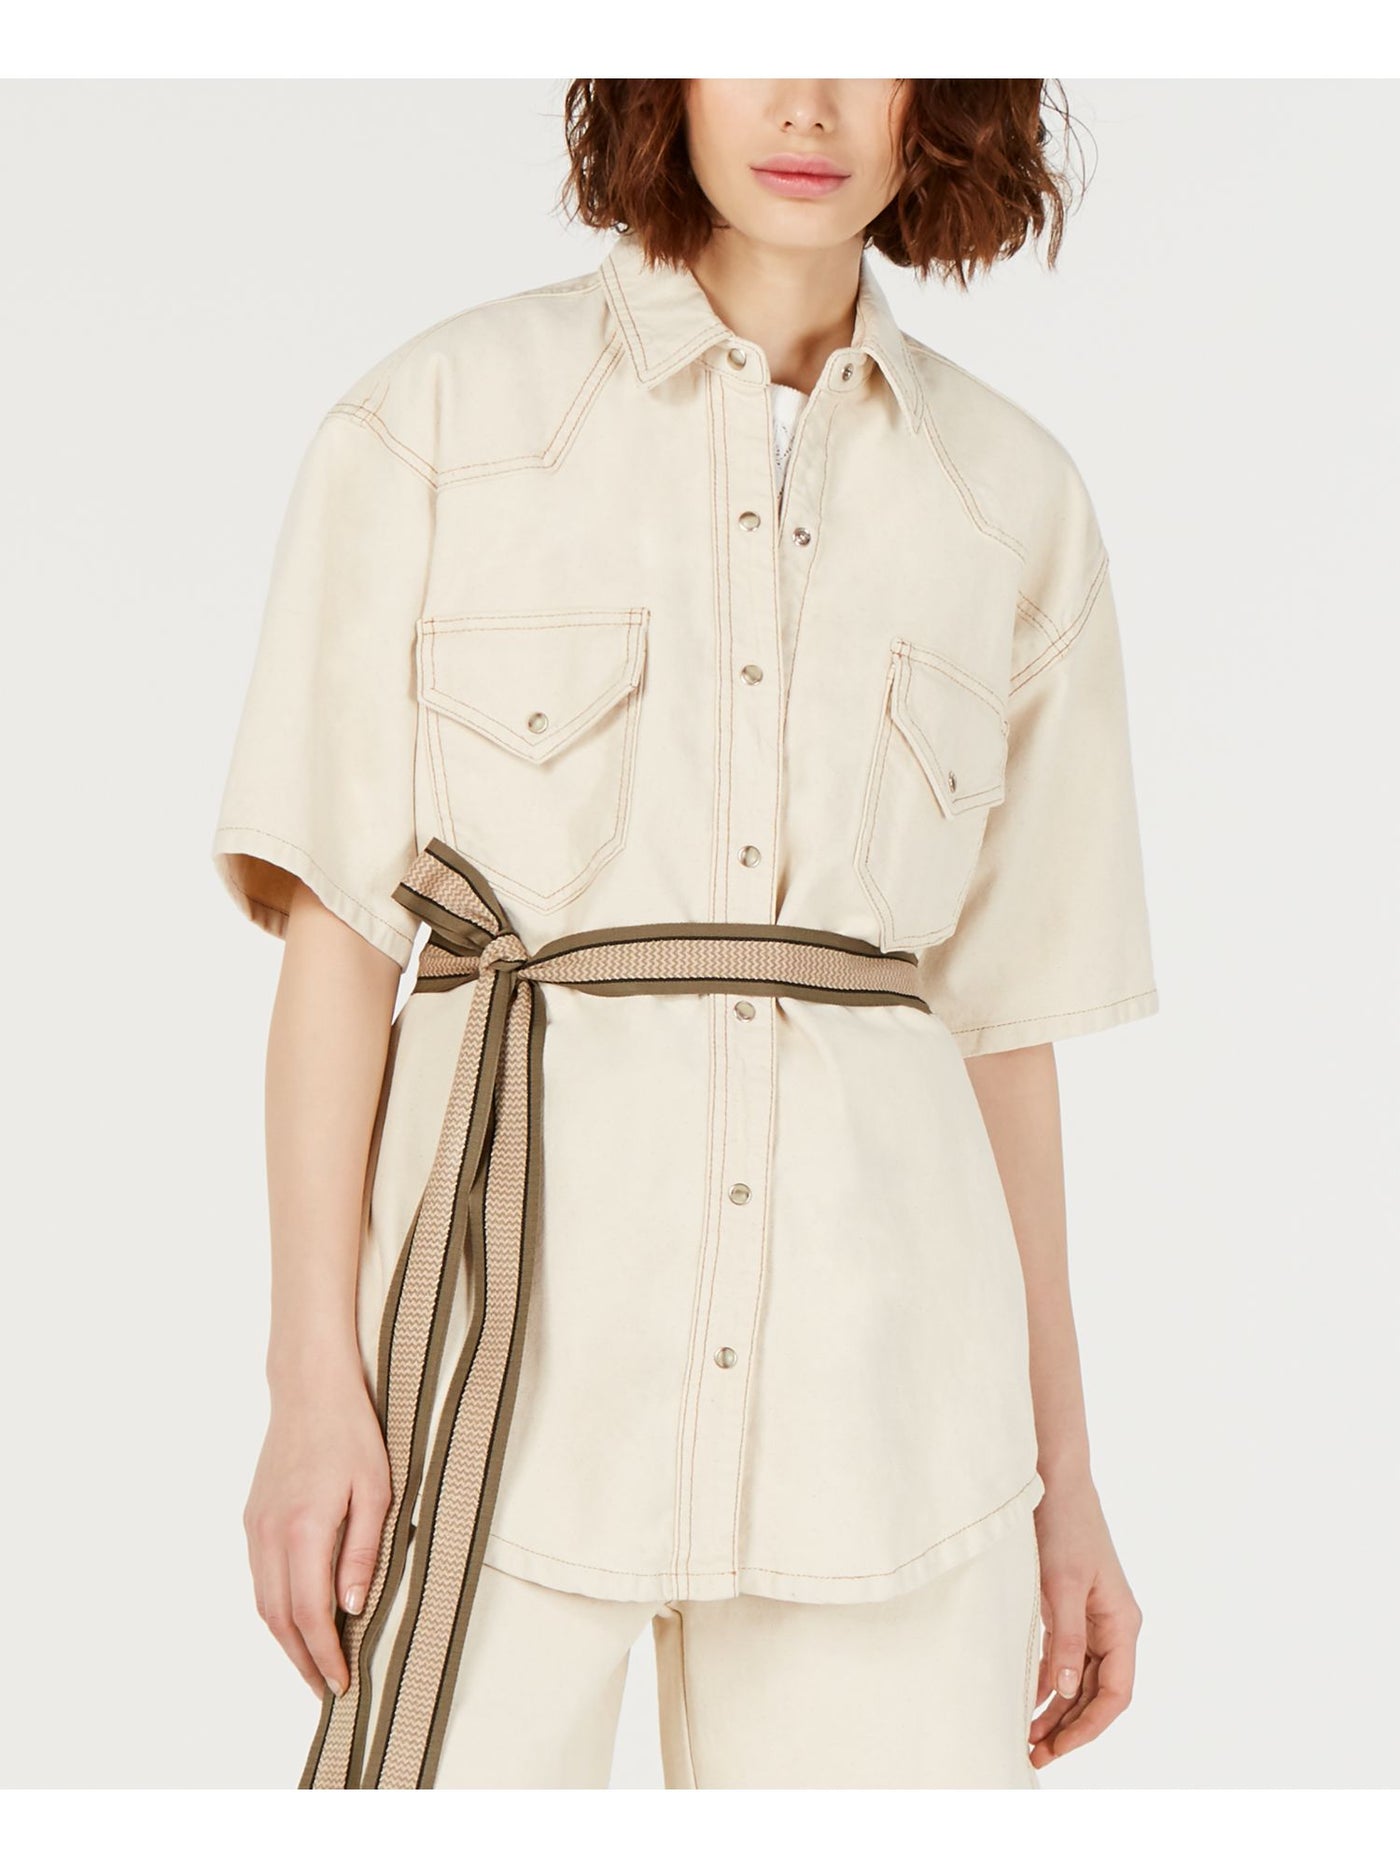 CURRENT AIR Womens Belted Short Sleeve Collared Button Up Top